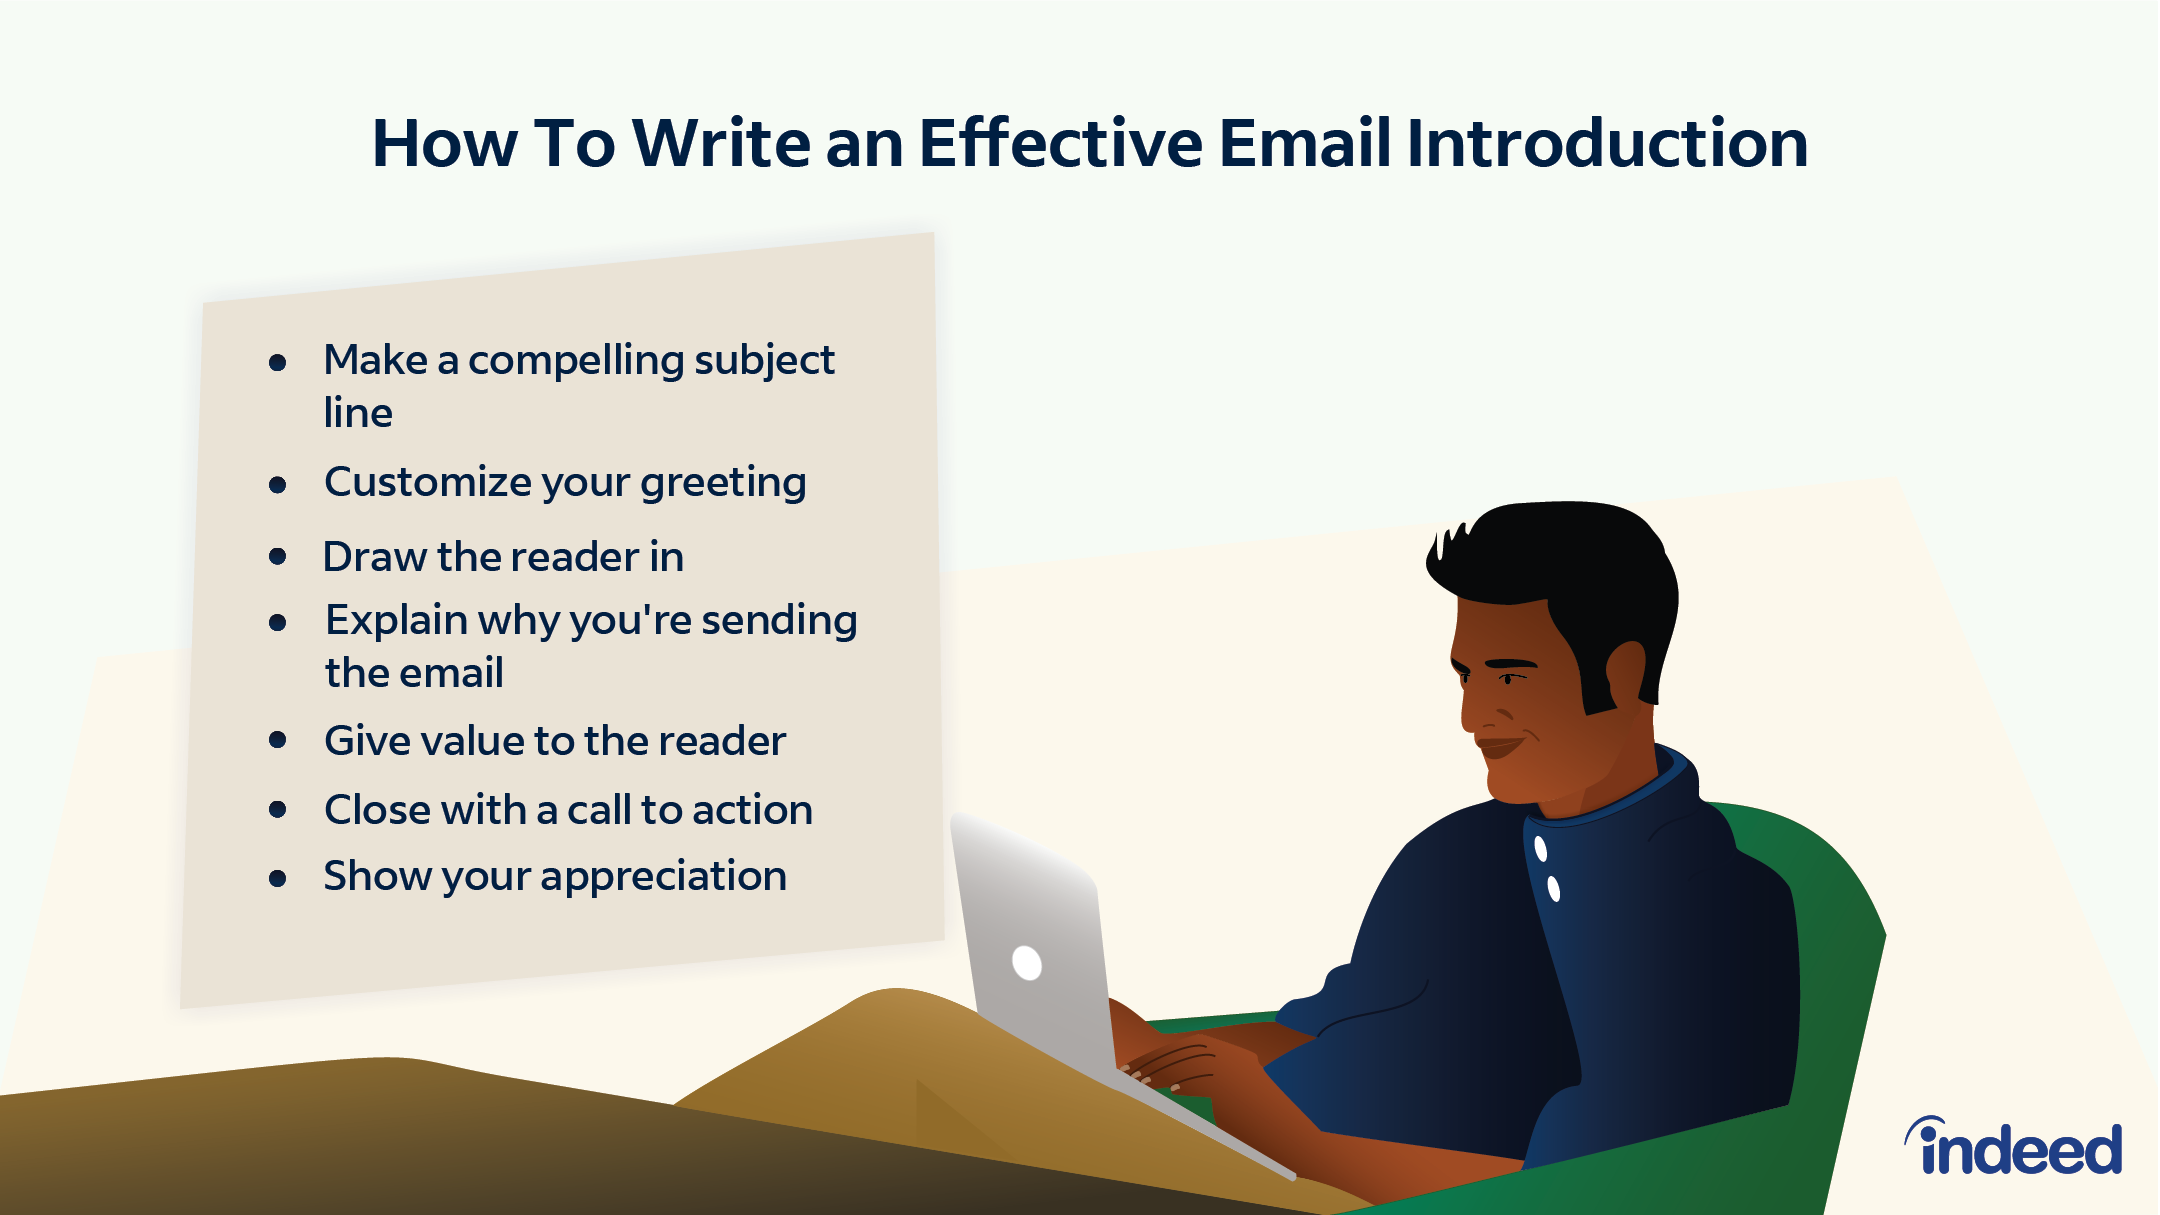 Introducing Yourself: 3 Email Introduction Examples